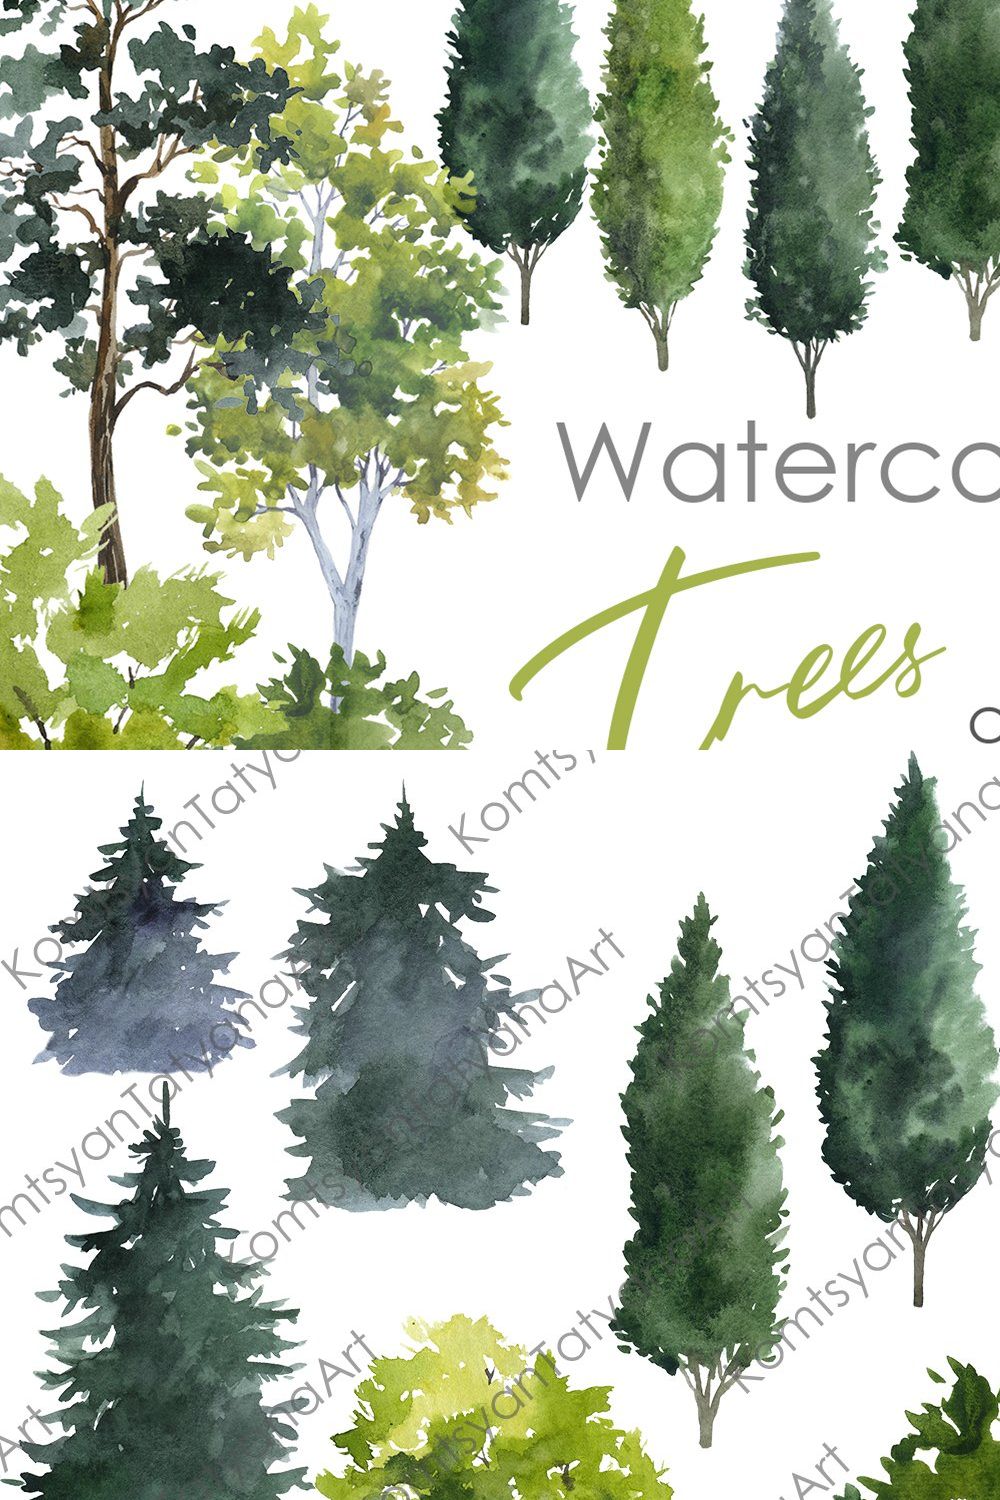 Watercolor clipart. Tree png pinterest preview image.